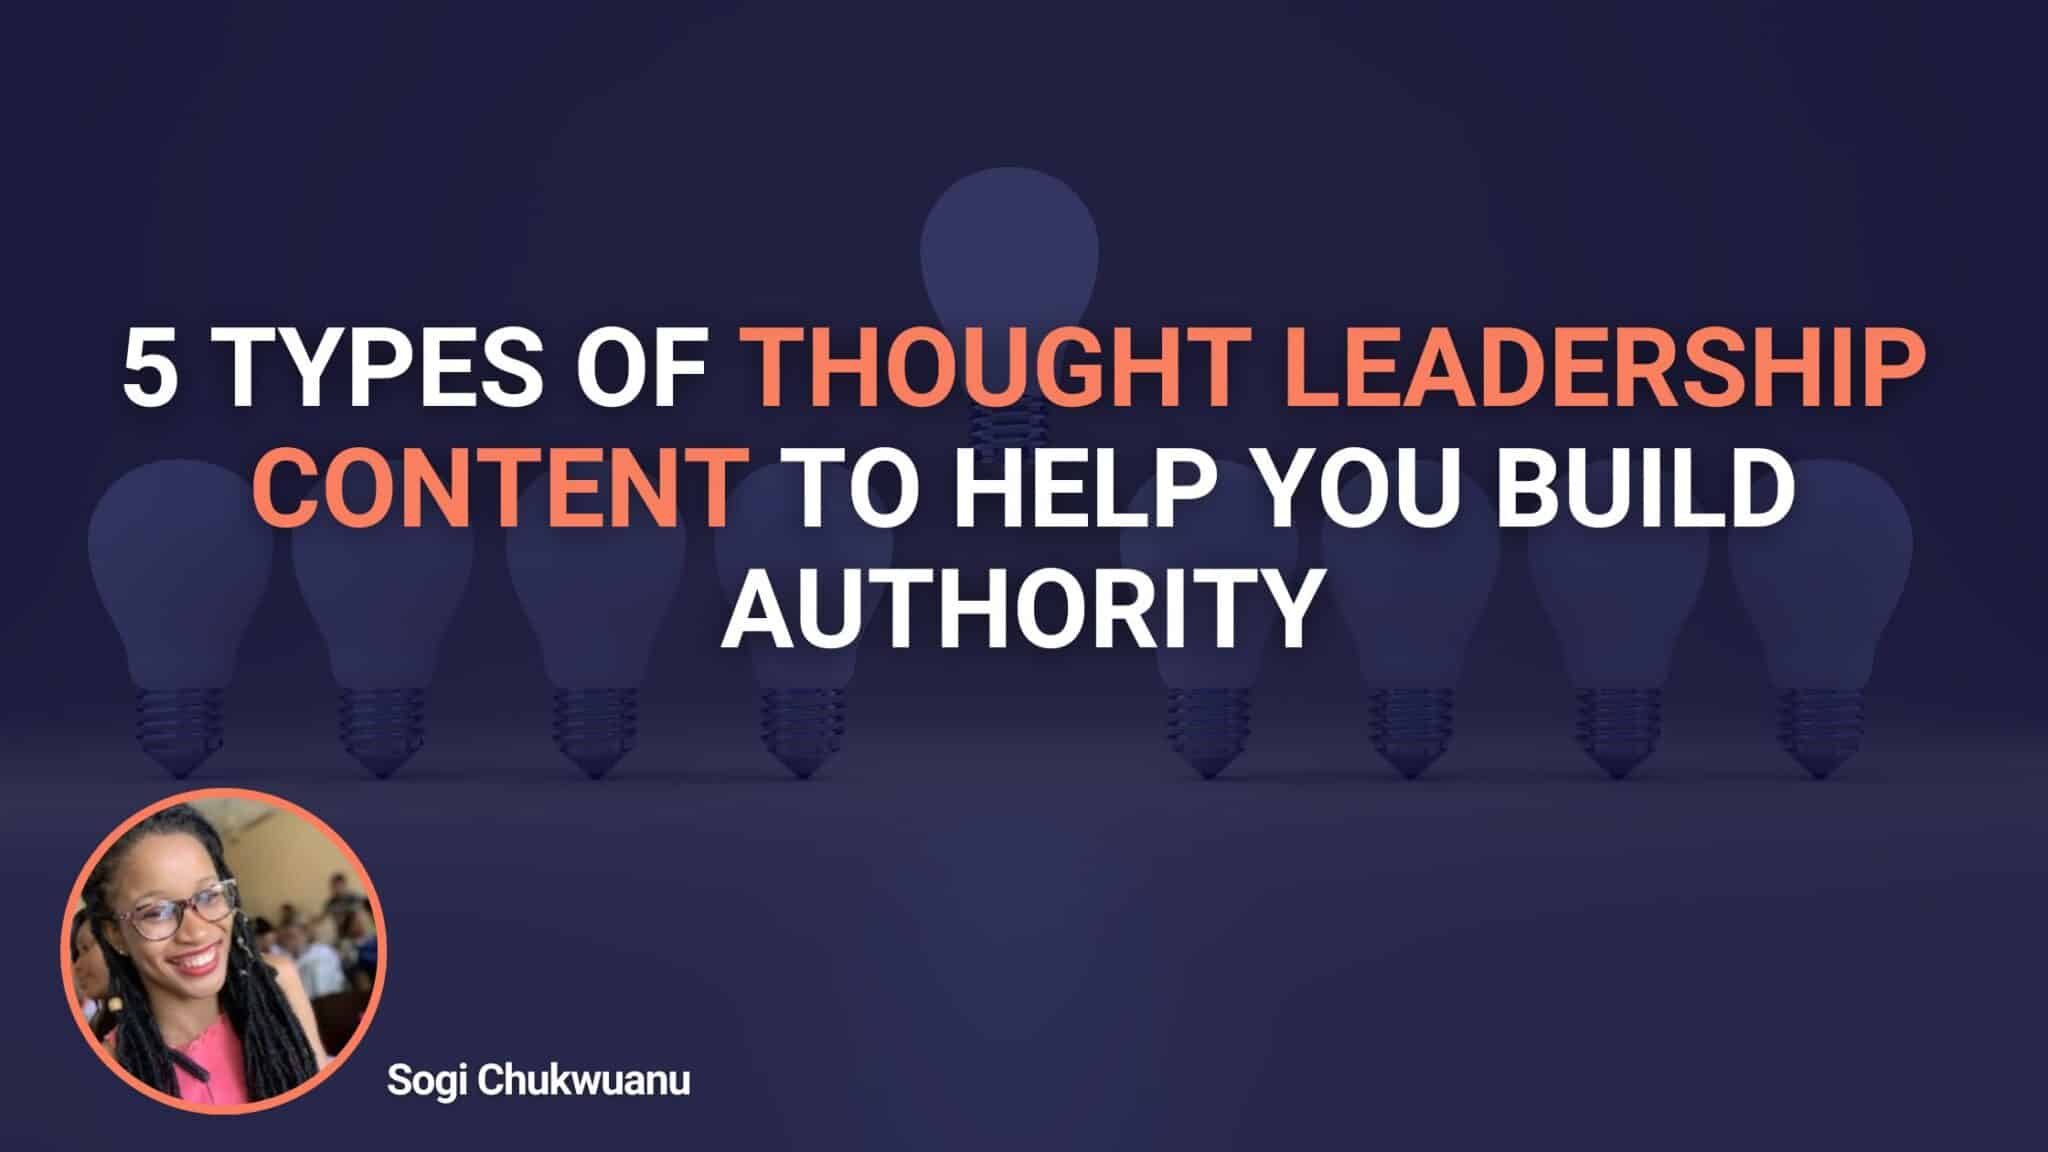 5 Types Of Thought Leadership Content To Help You Build Authority